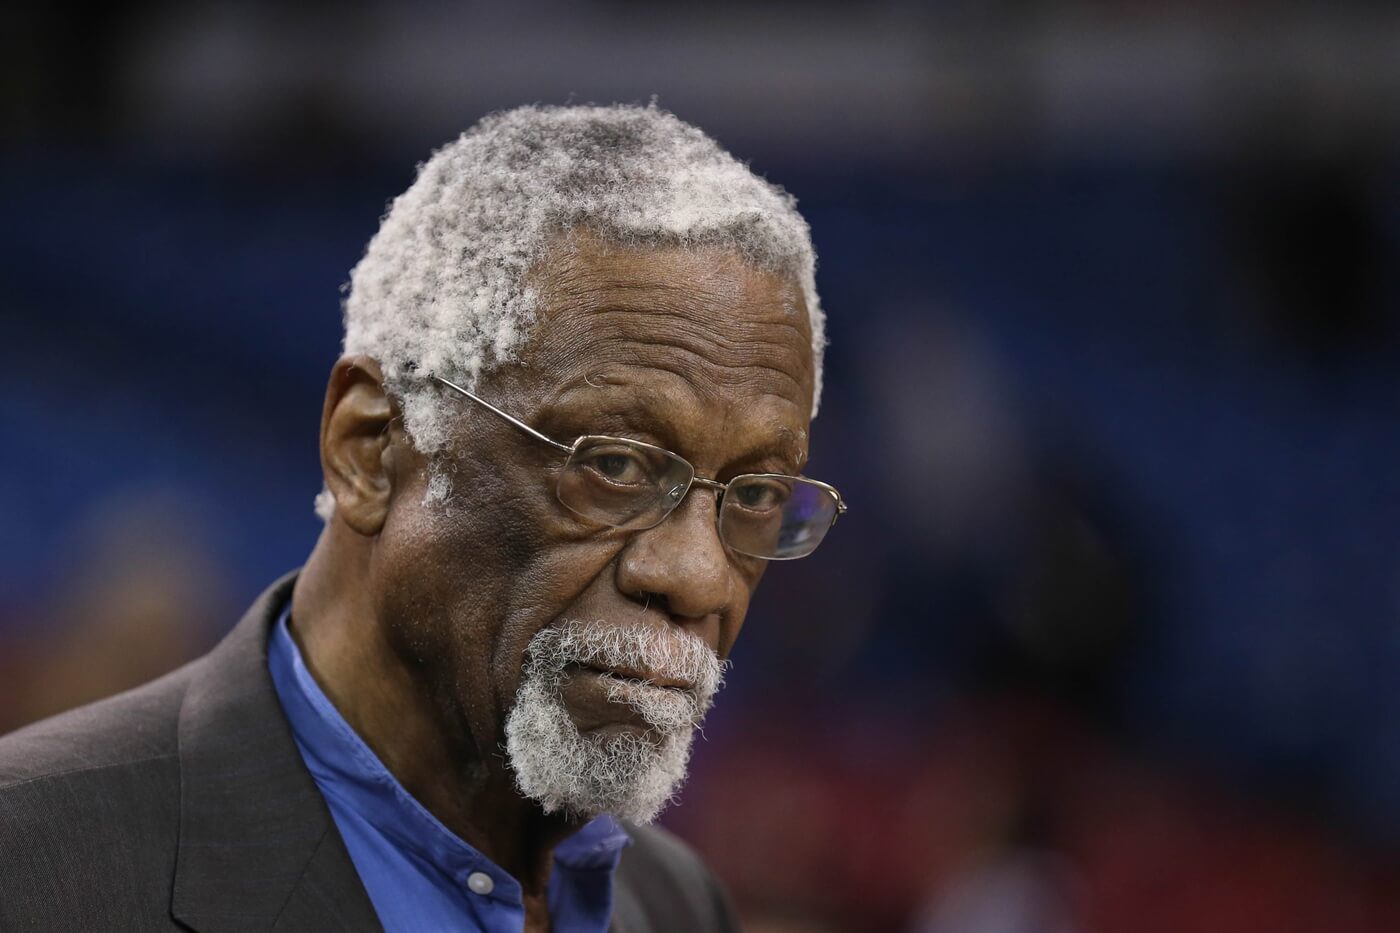 Feb 5, 2015; Sacramento, CA, USA; Retired NBA player and coach Bill Russell after the game between the Sacramento Kings and the Dallas Mavericks at Sleep Train Arena. The Dallas Mavericks defeated the Sacramento Kings 101-78. Mandatory Credit: Kelley L Cox-USA TODAY Sports